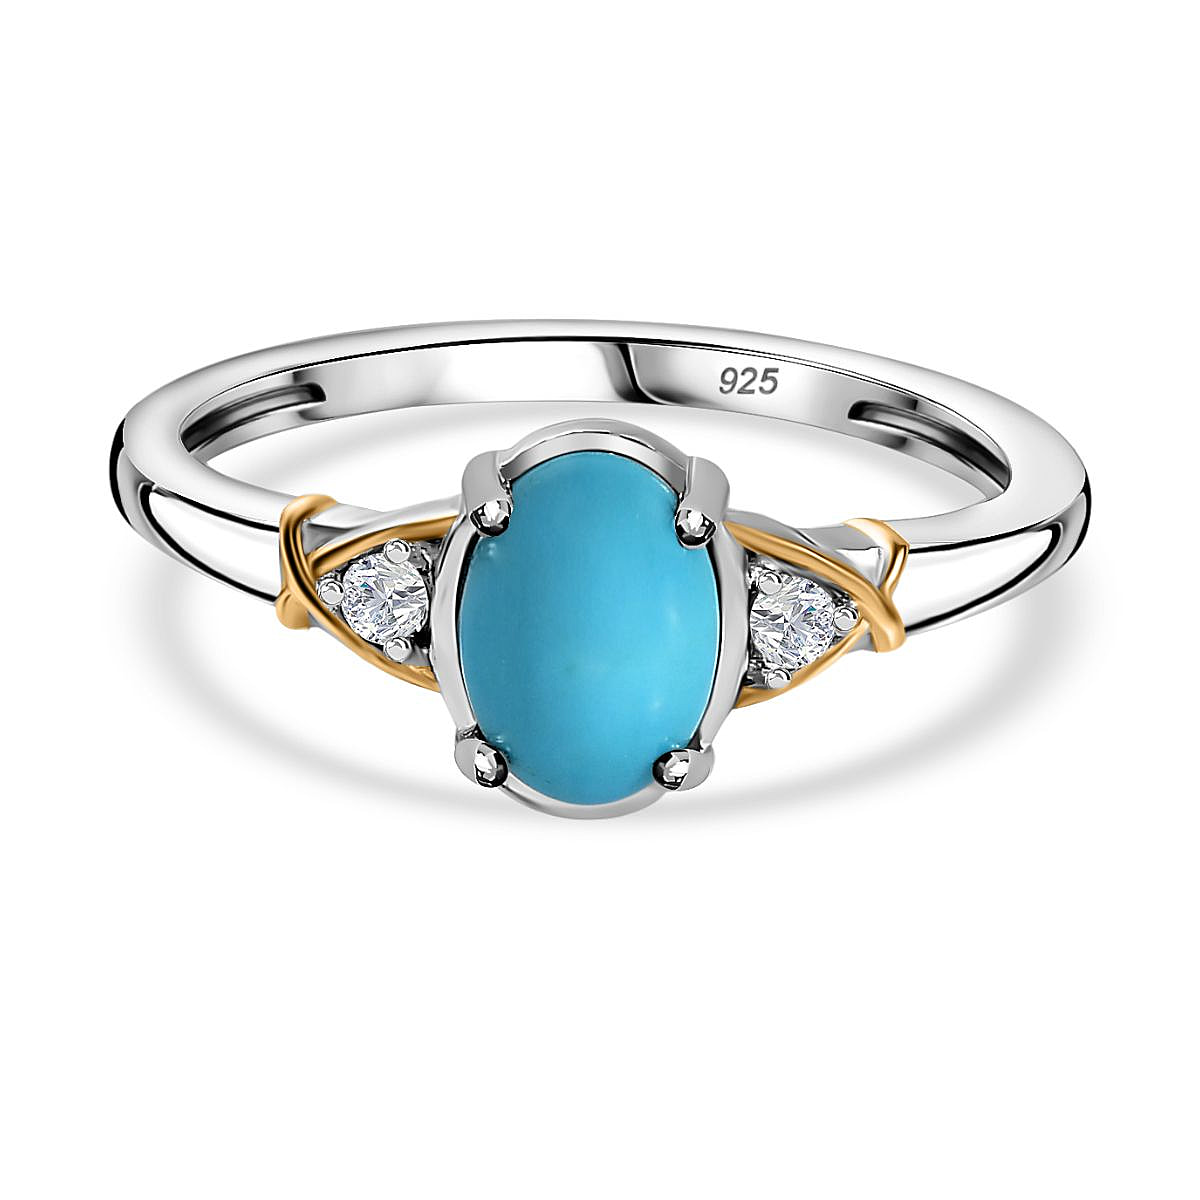 Arizona Sleeping Beauty Turquoise & Natural Zircon Ring in 18K Vermeil YG & Platinum Plated Sterling Silver